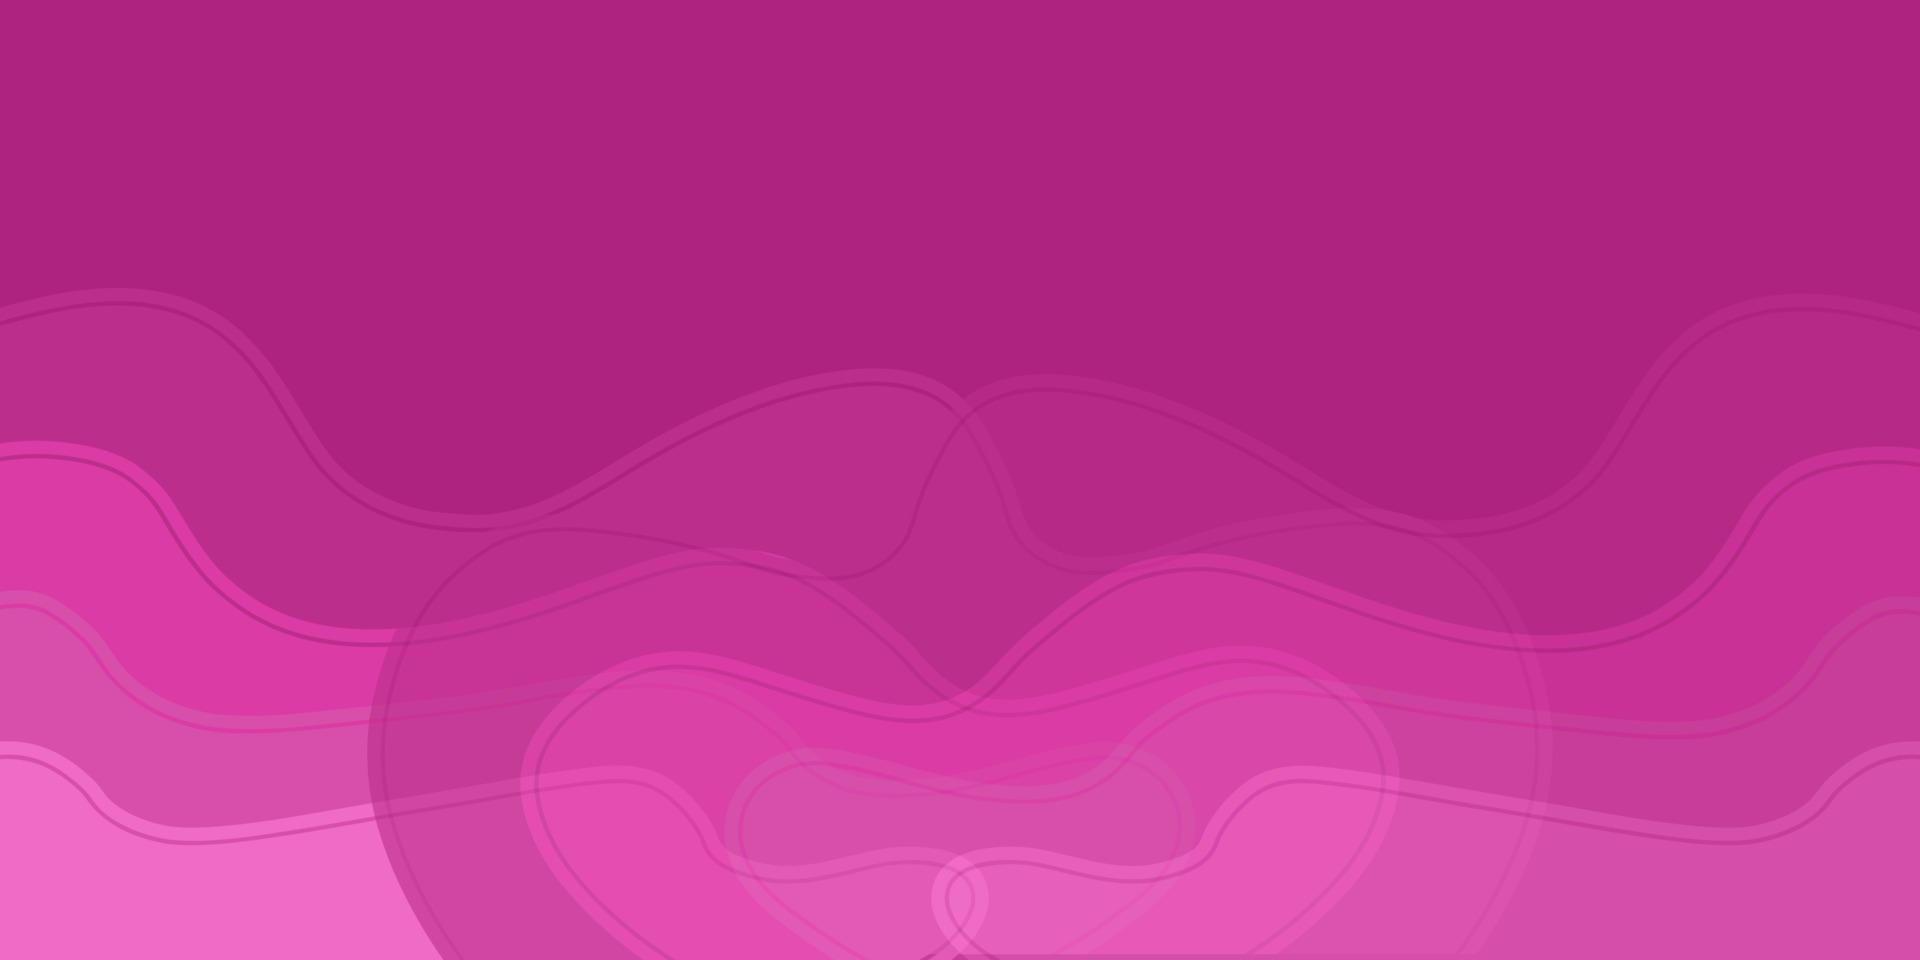 Abstract Background Pink Wave Pattern for Frame Creative Graphic Design vector